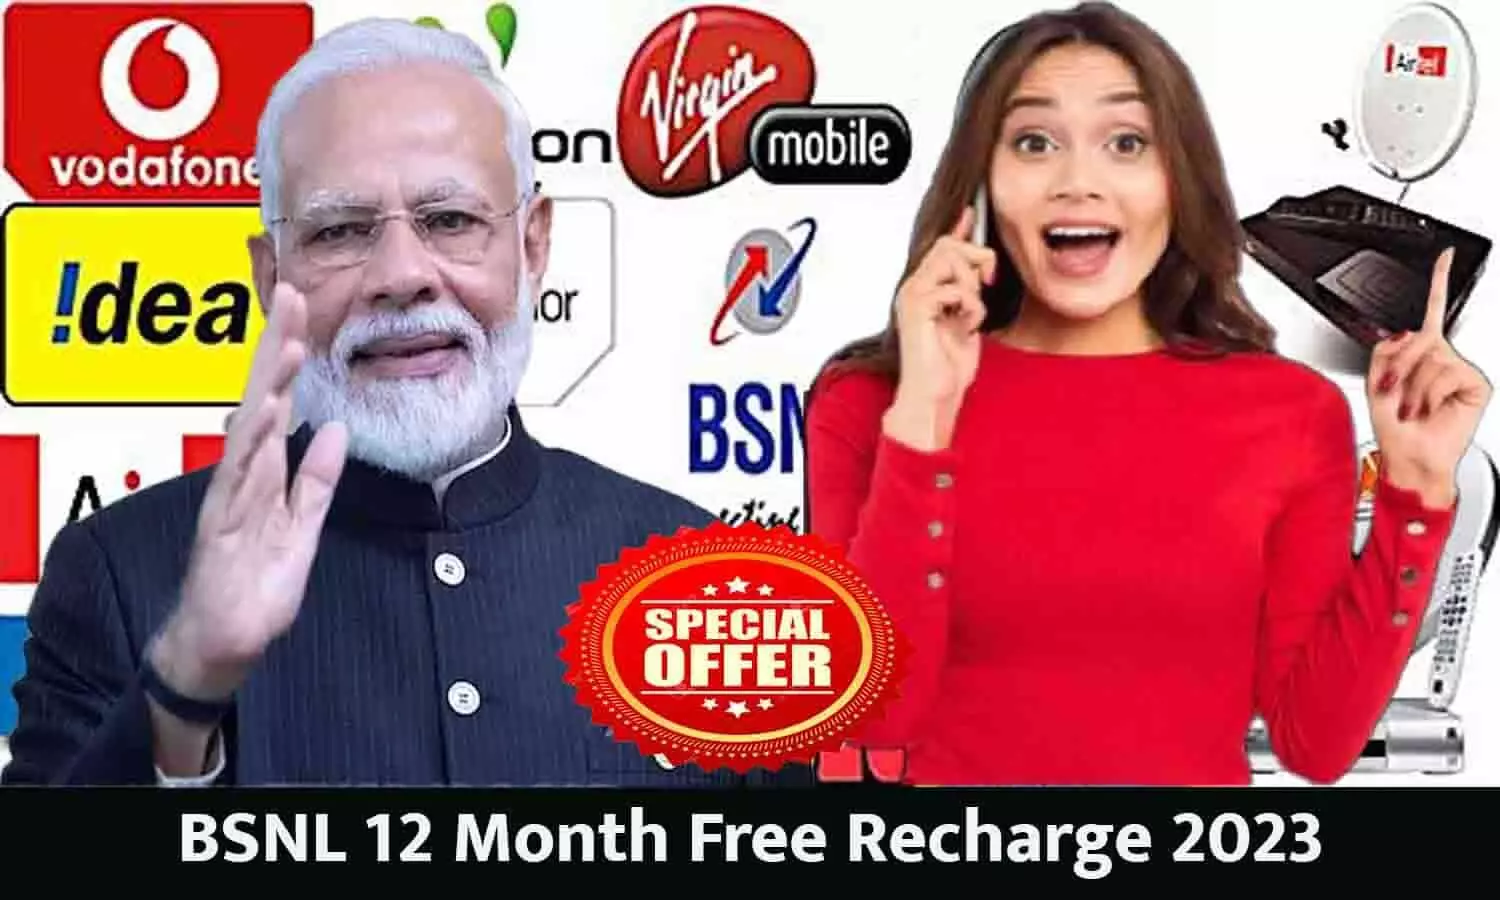 BSNL 12 Month Free Recharge 2023